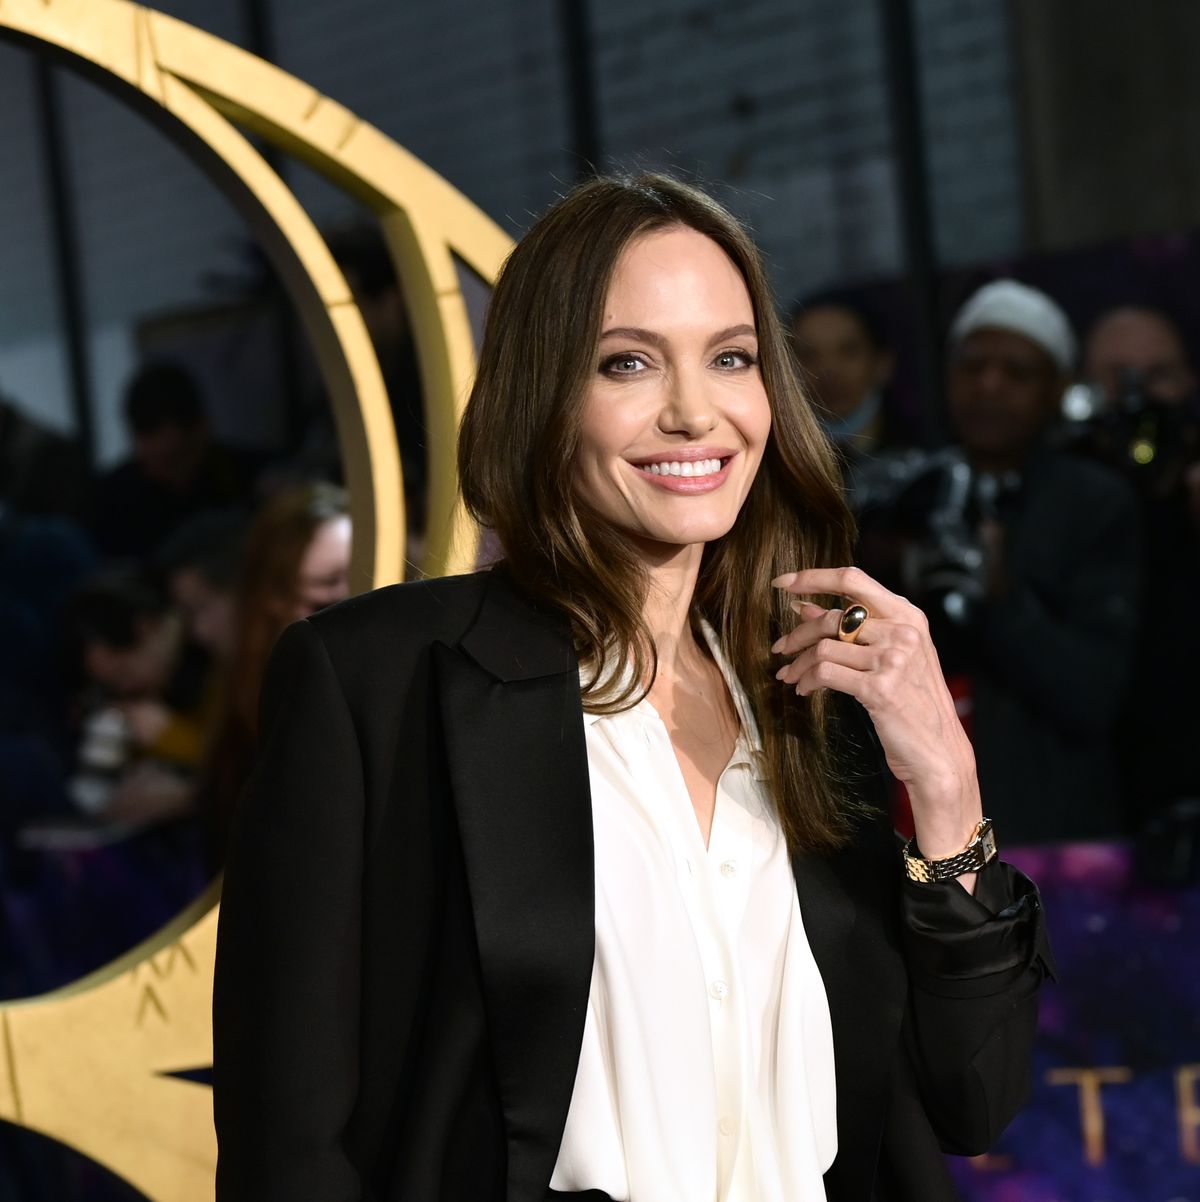 What Is Angelina Jolie's Net Worth and Movie Salary?